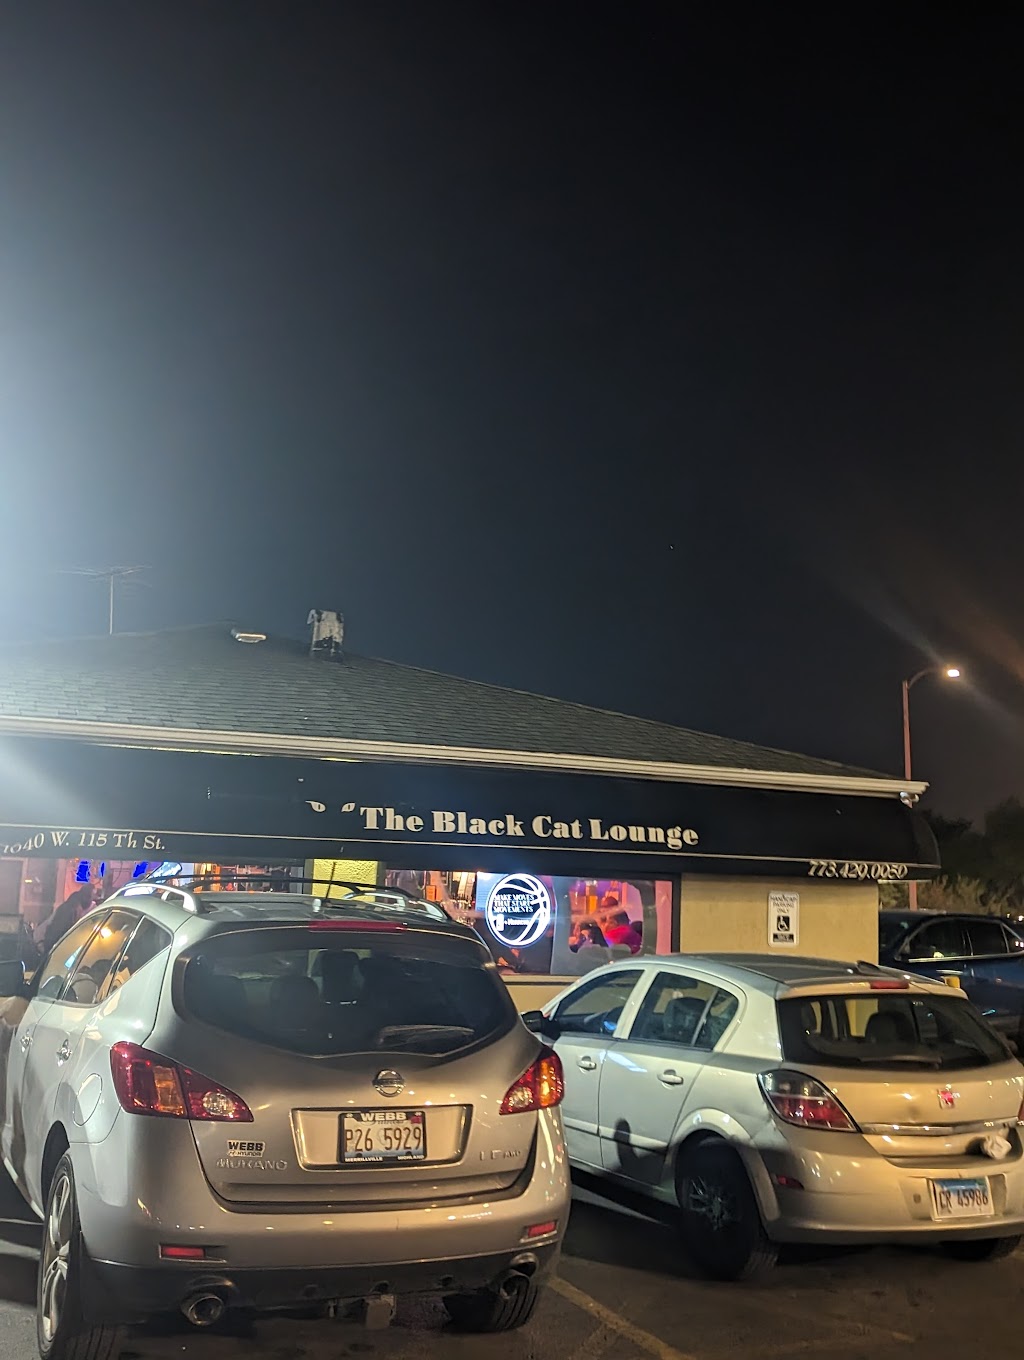 The Black Cat Lounge | 1640 W 115th St, Chicago, IL 60643 | Phone: (773) 429-0950